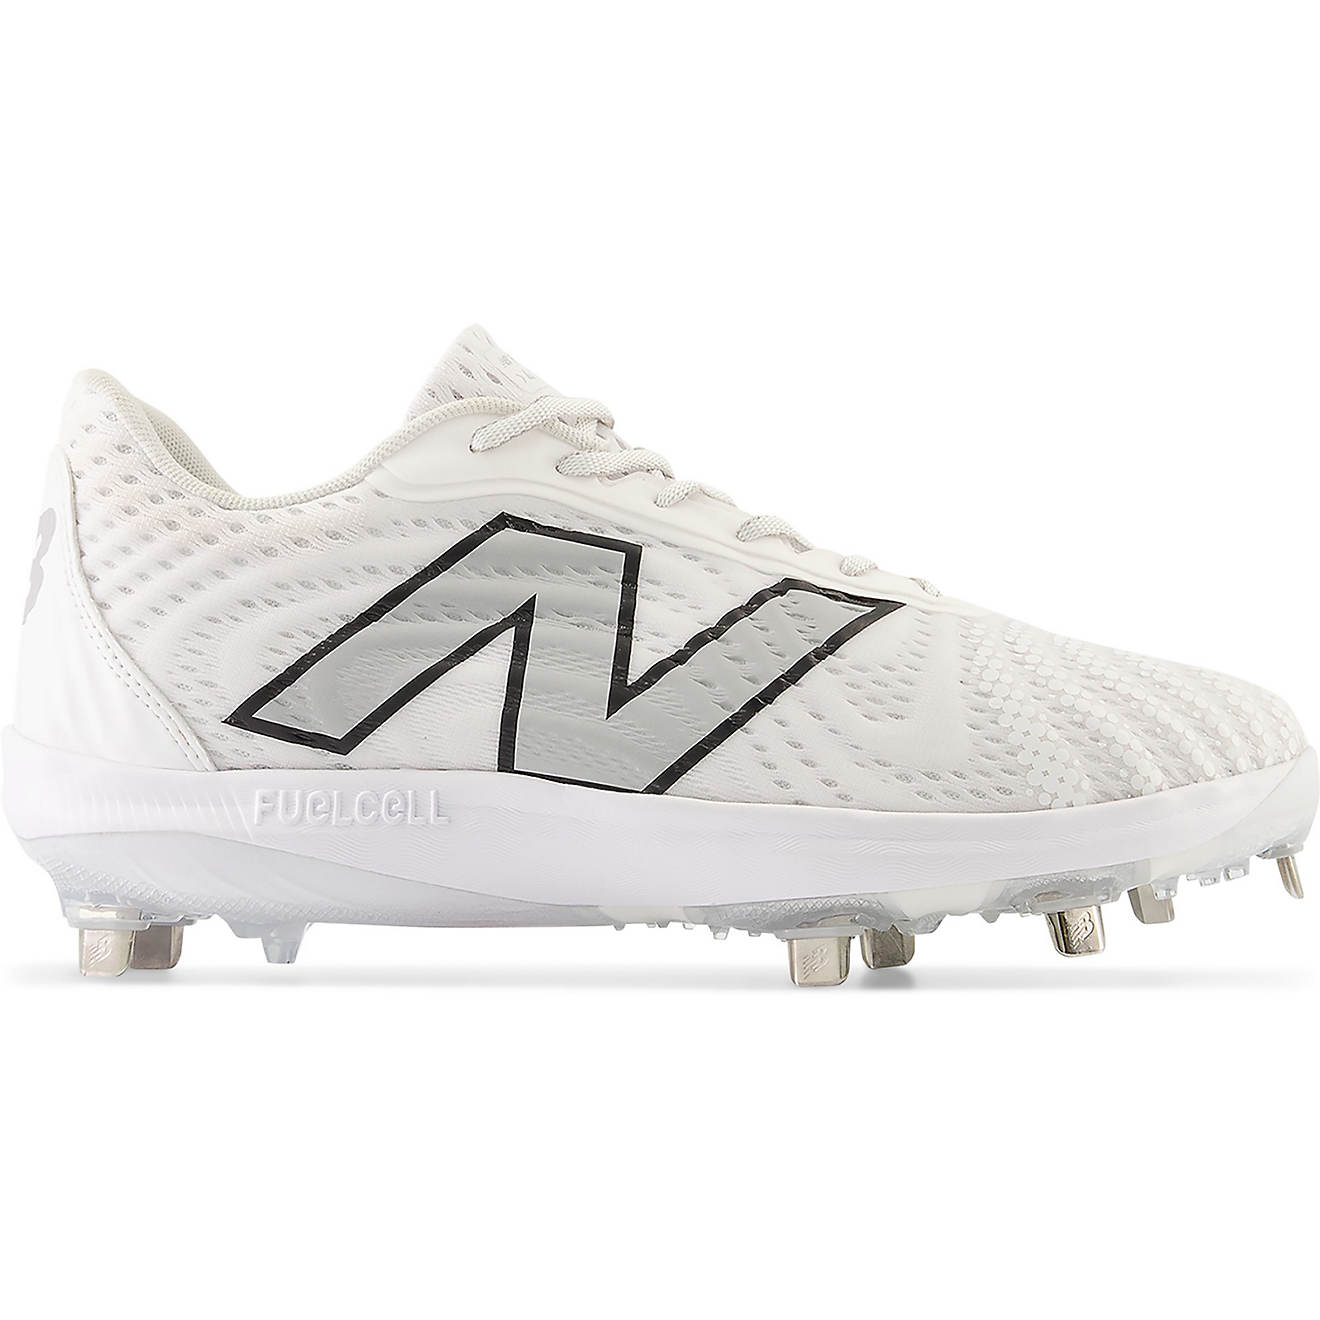 New Balance Men's FuelCell 4040 V7 Metal Baseball Cleats                                                                         - view number 1